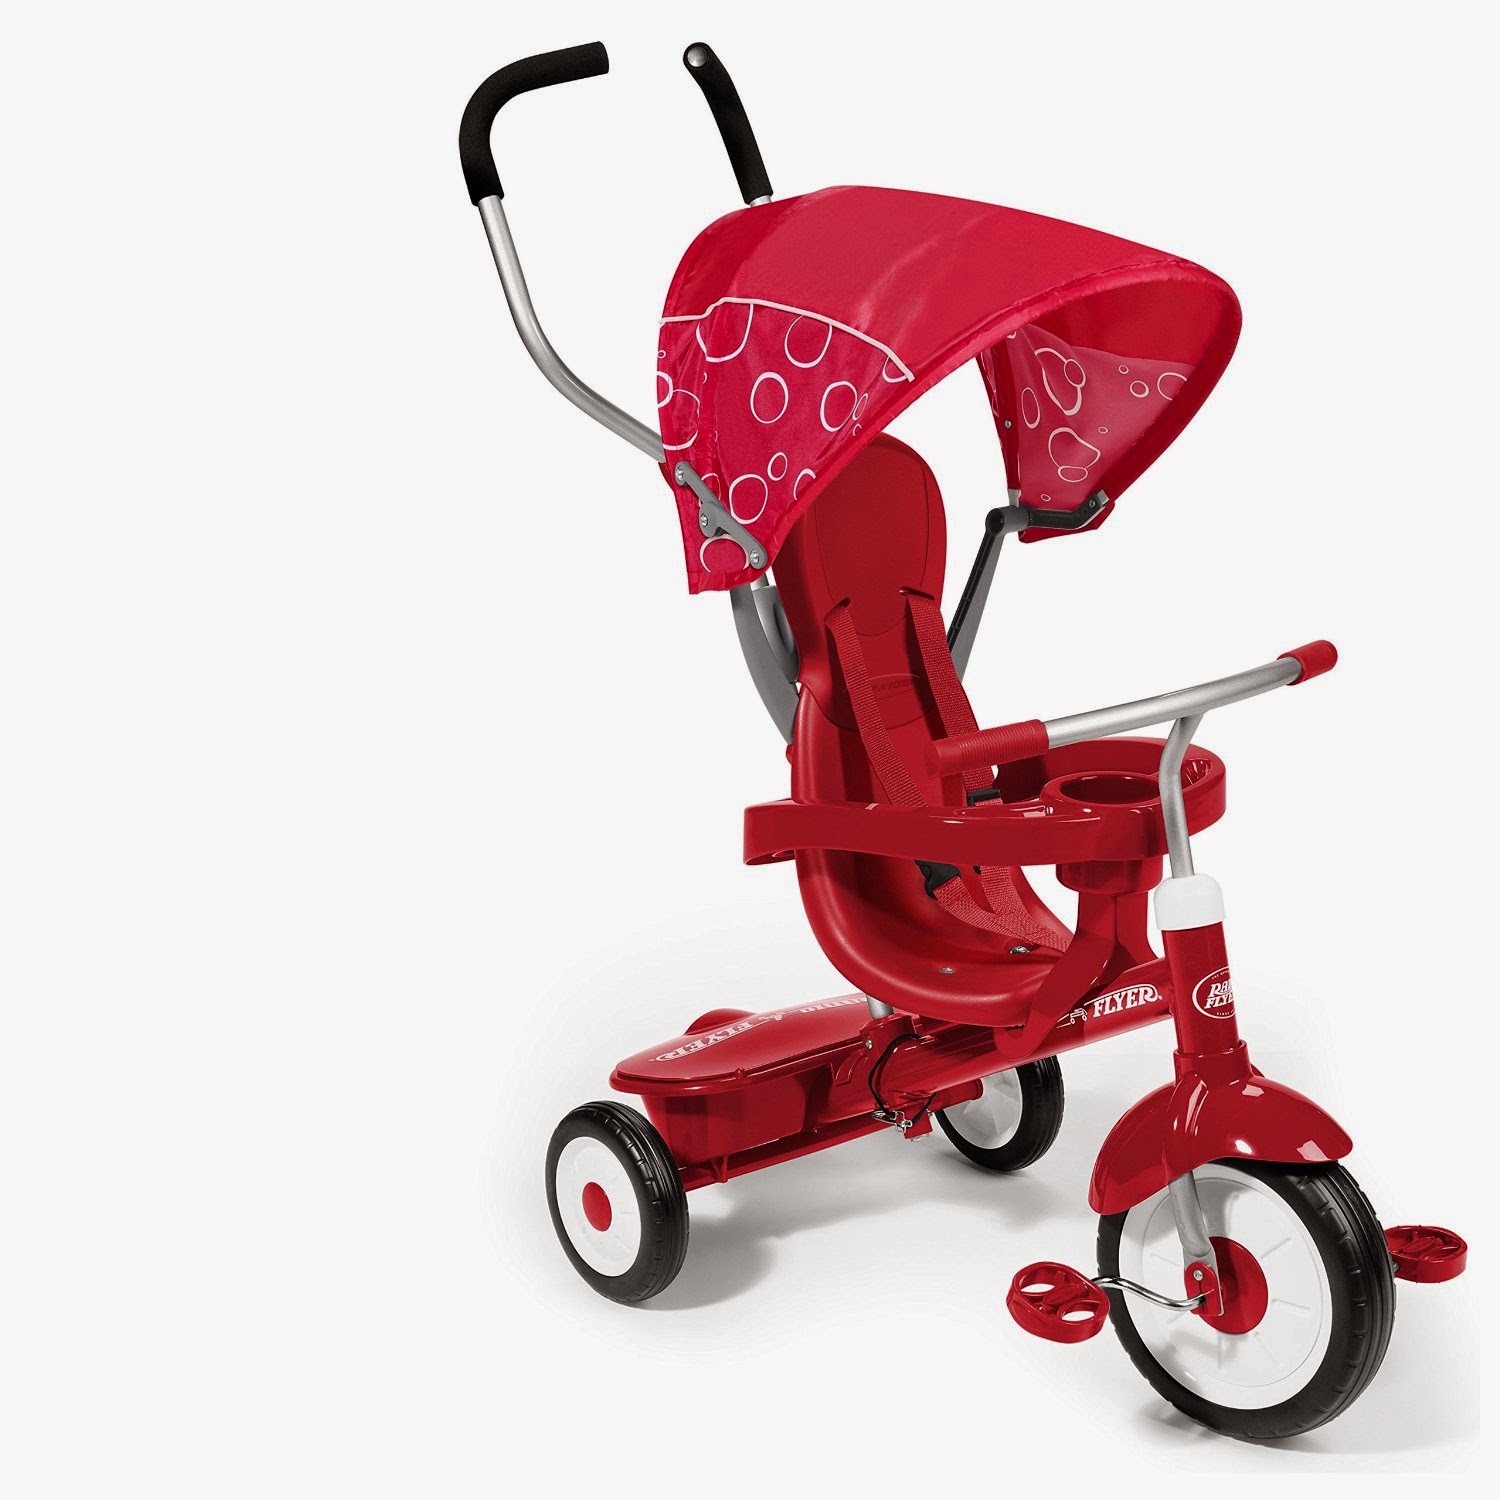 Radio Flyer 4-in-1 Trike, review, for children age 9 months to 5 years, convert from stroller to steering trike to learning to ride bike to classic trike